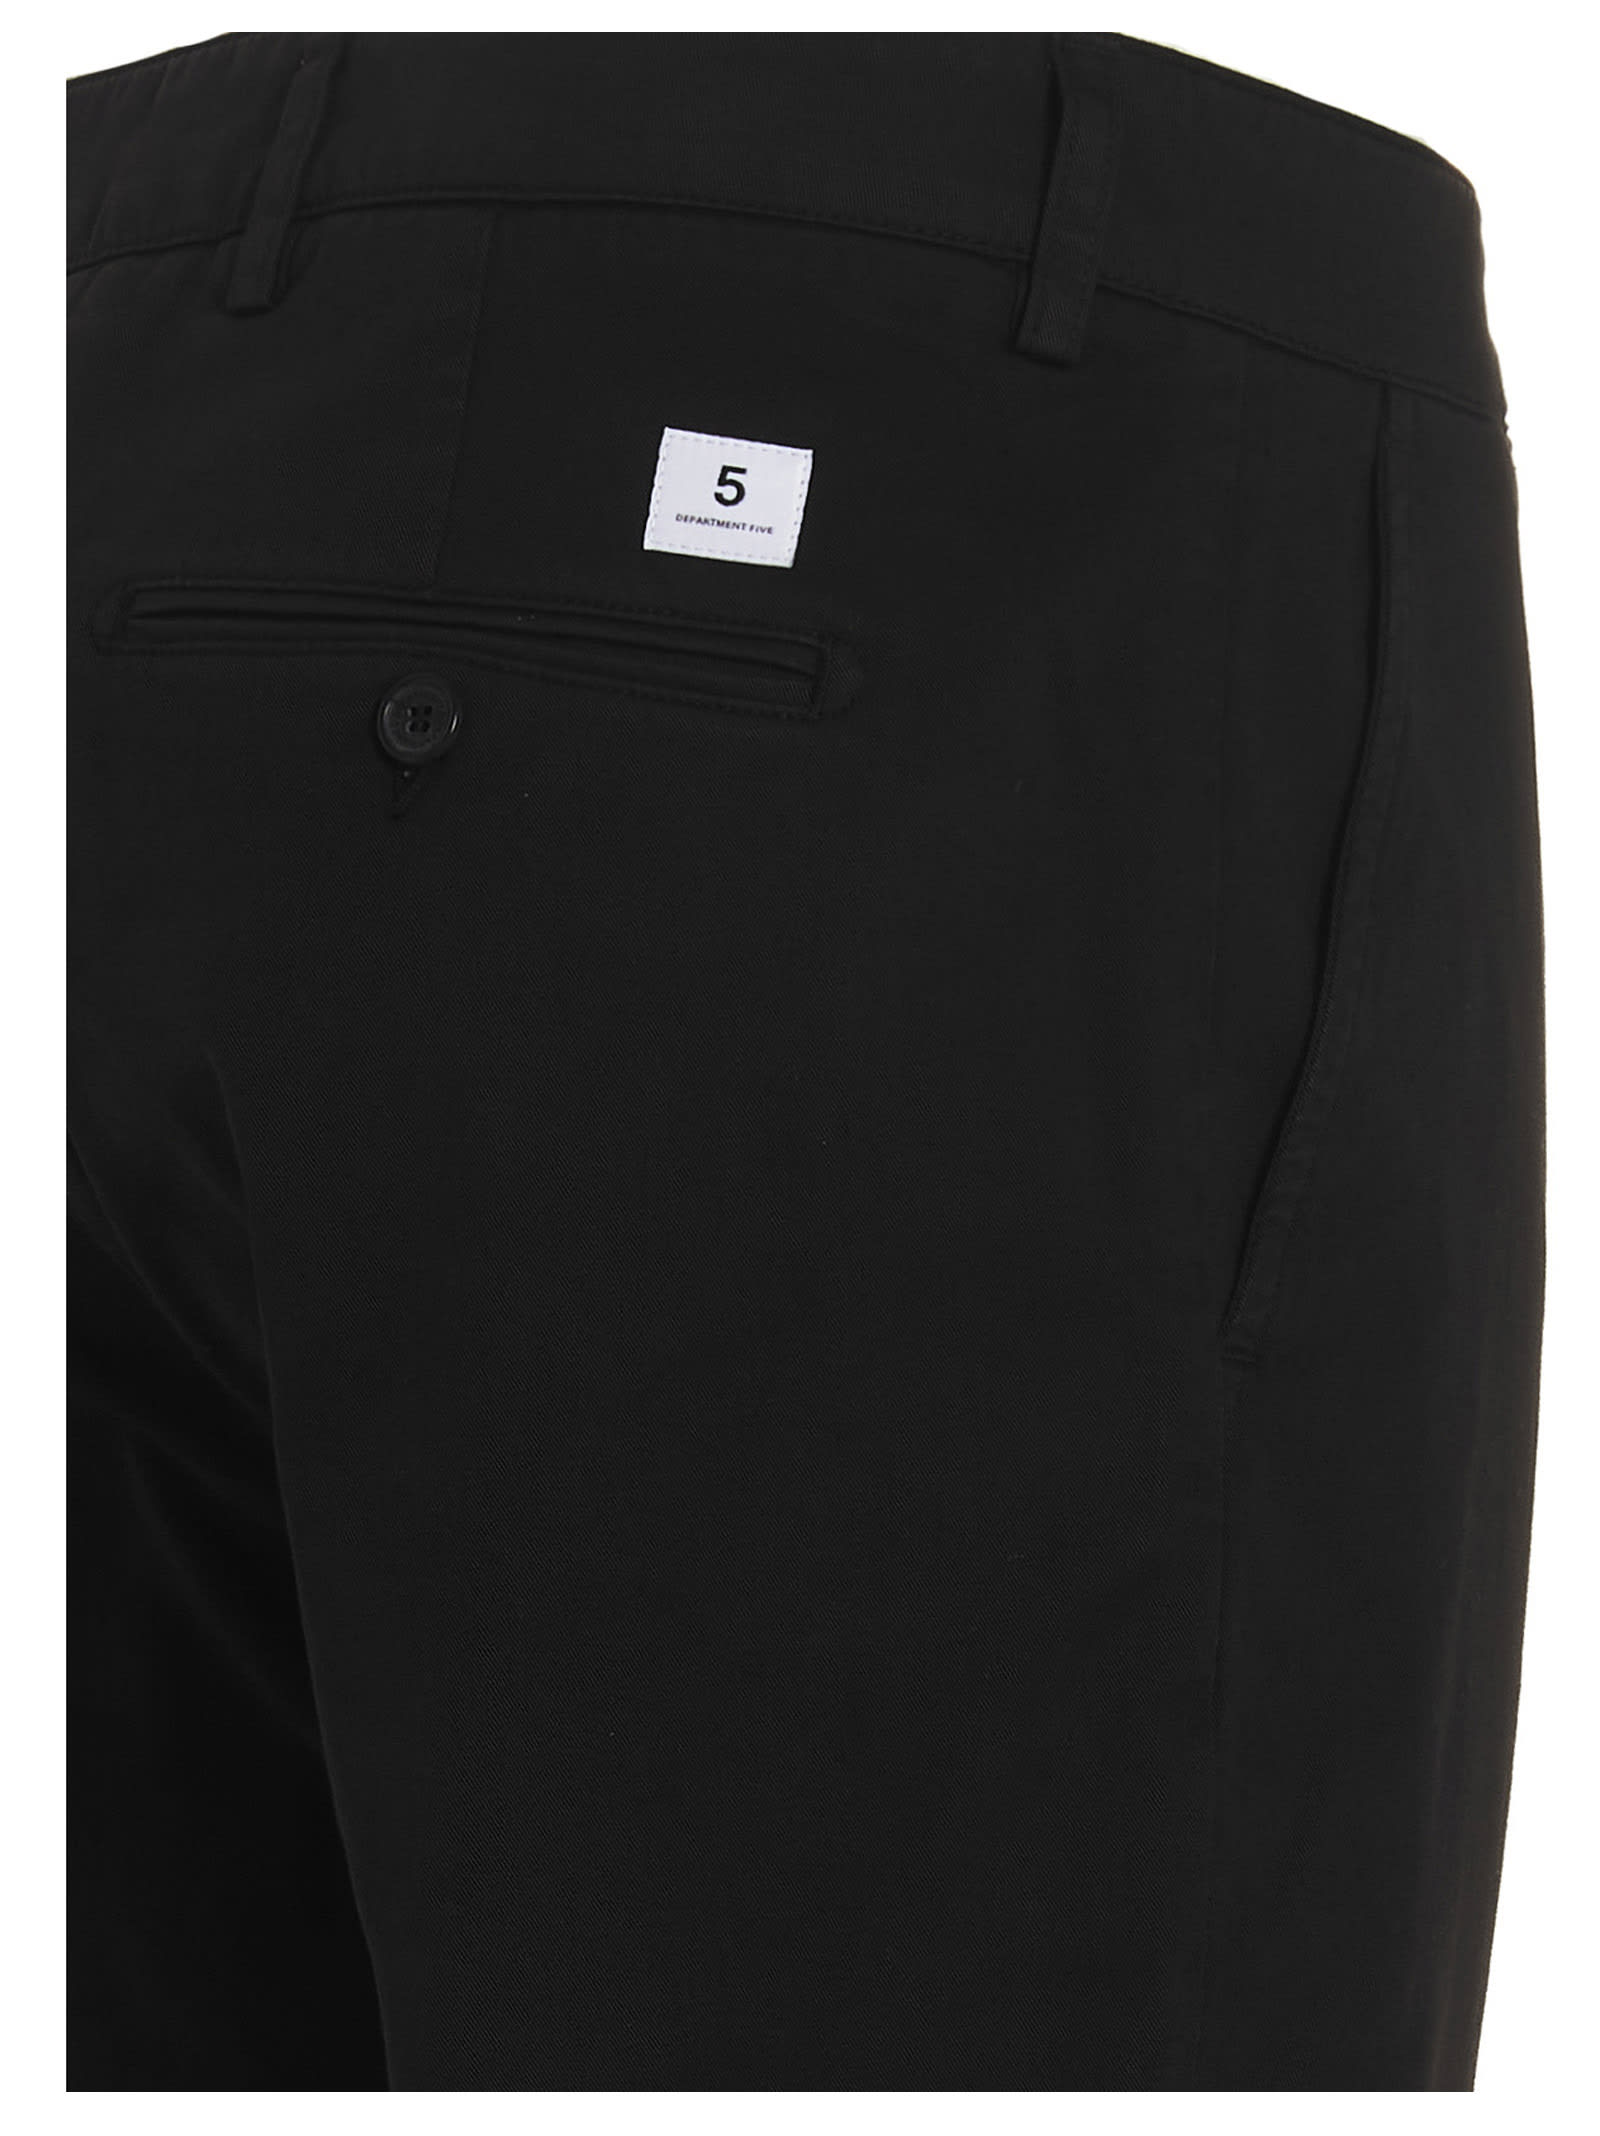 Shop Department Five Mike Trousers